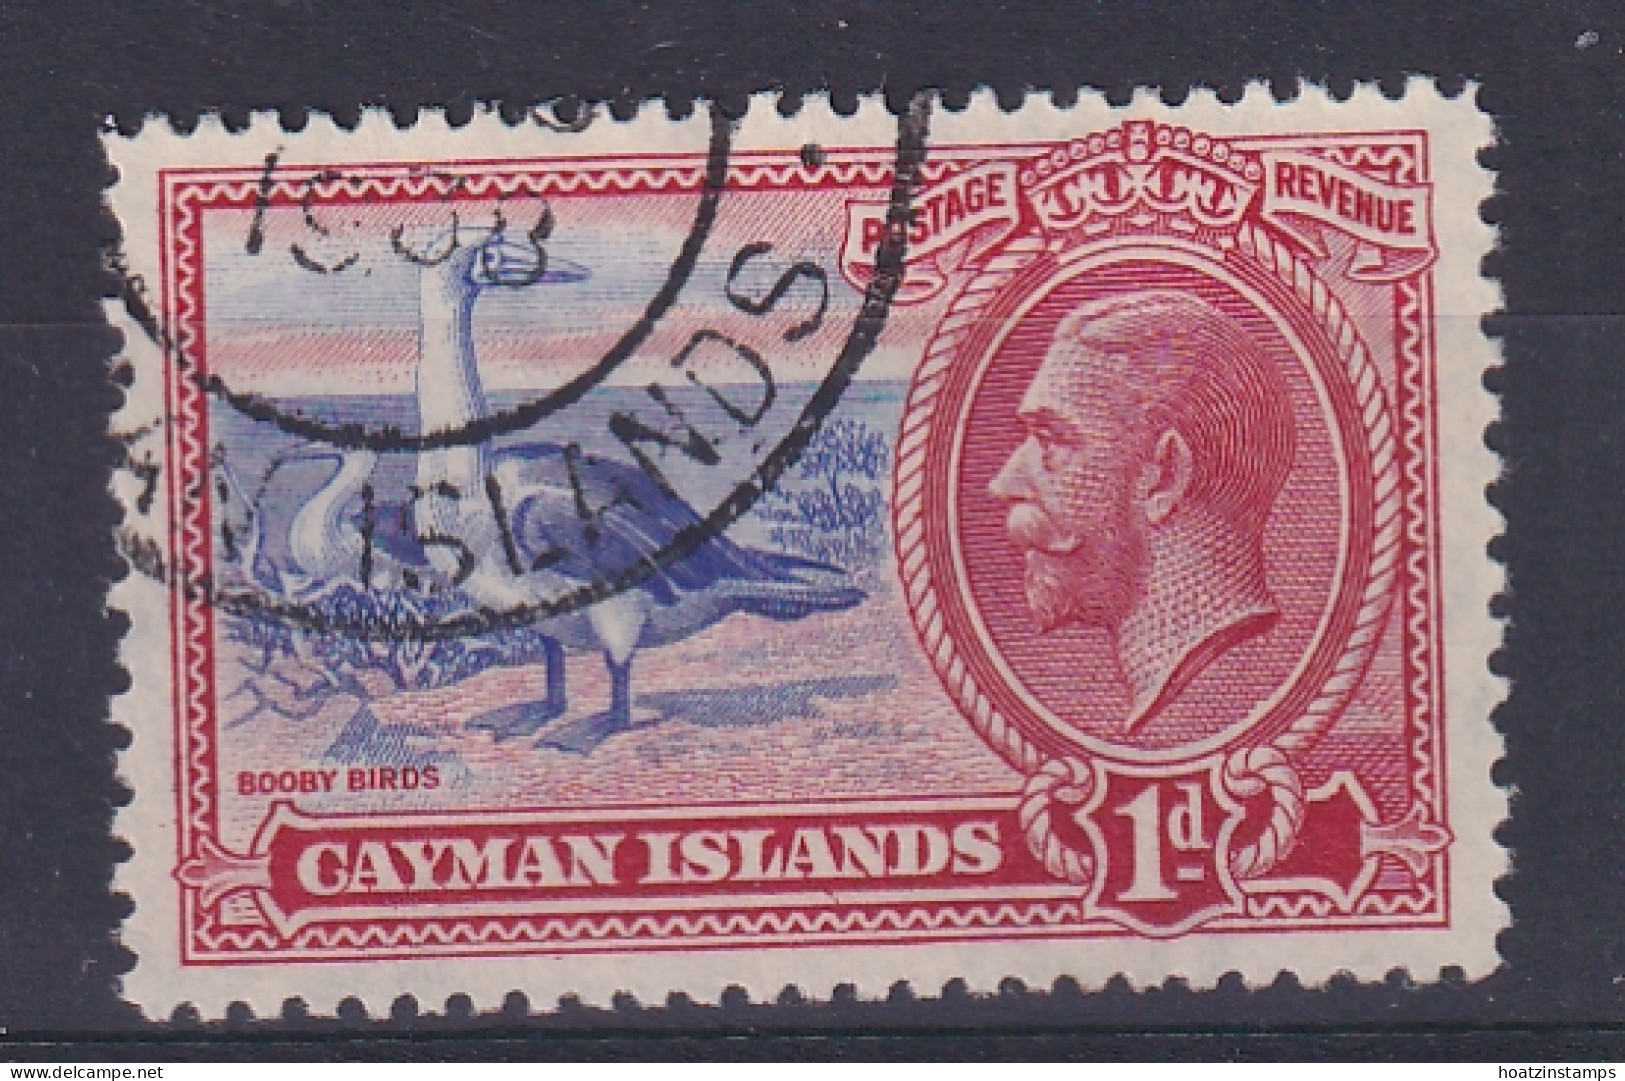 Cayman Islands: 1935   KGV - Pictorial   SG98   1d     Used - Kaimaninseln